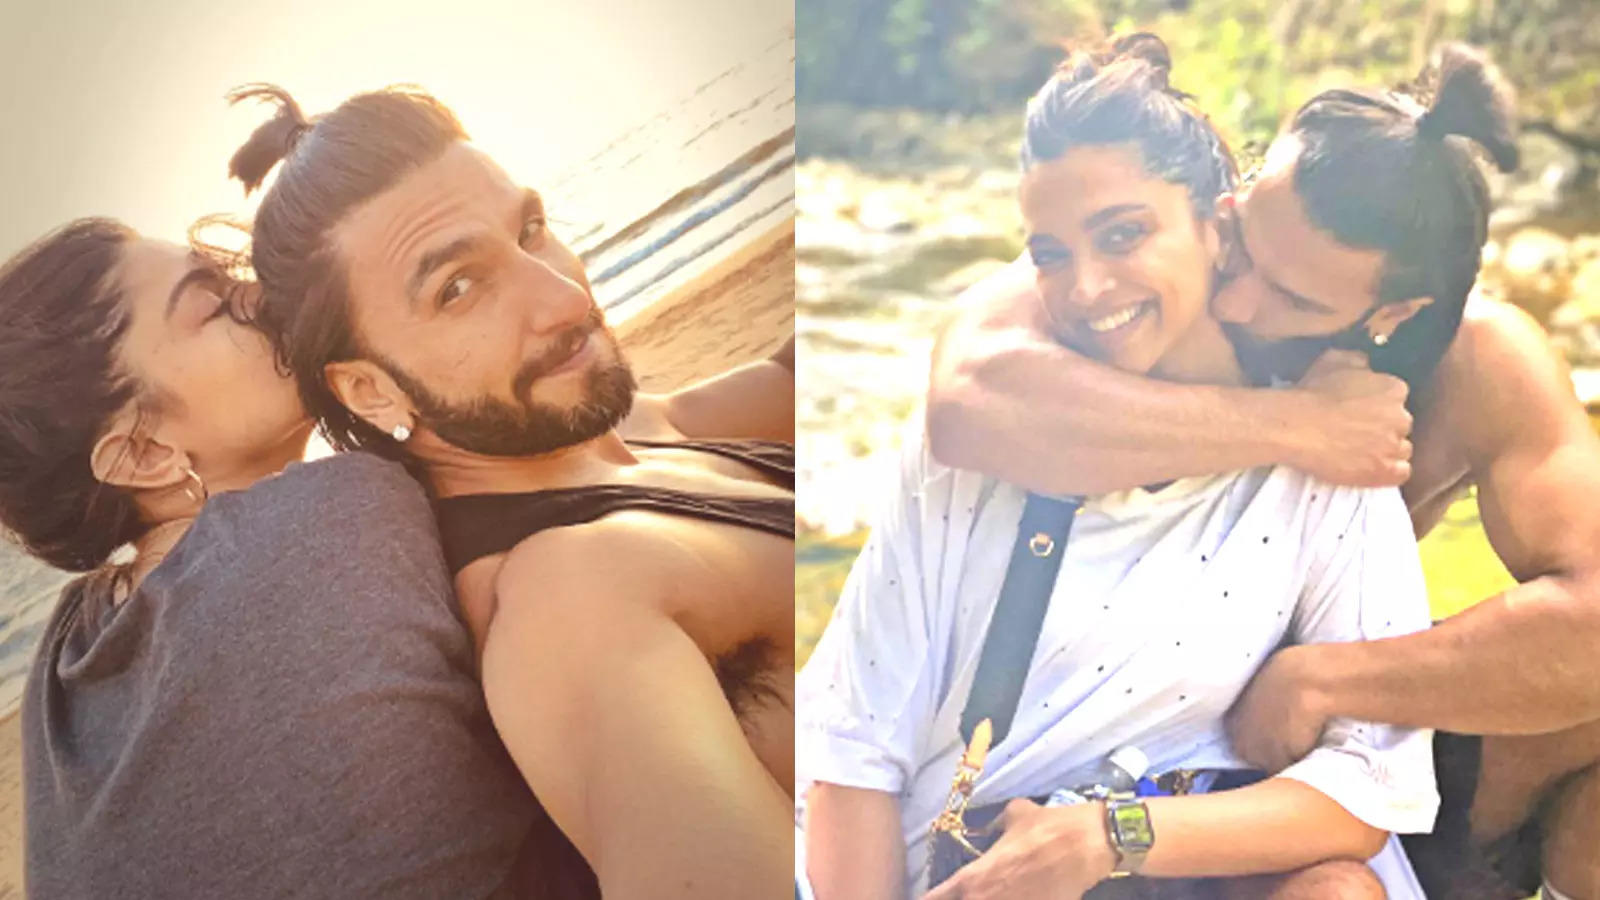 Ranveer Singh’s PDA with Deepika Padukone will make you fall in love as the actor shares fresh glimpses from their recent vacation | Hindi Movie News – Bollywood